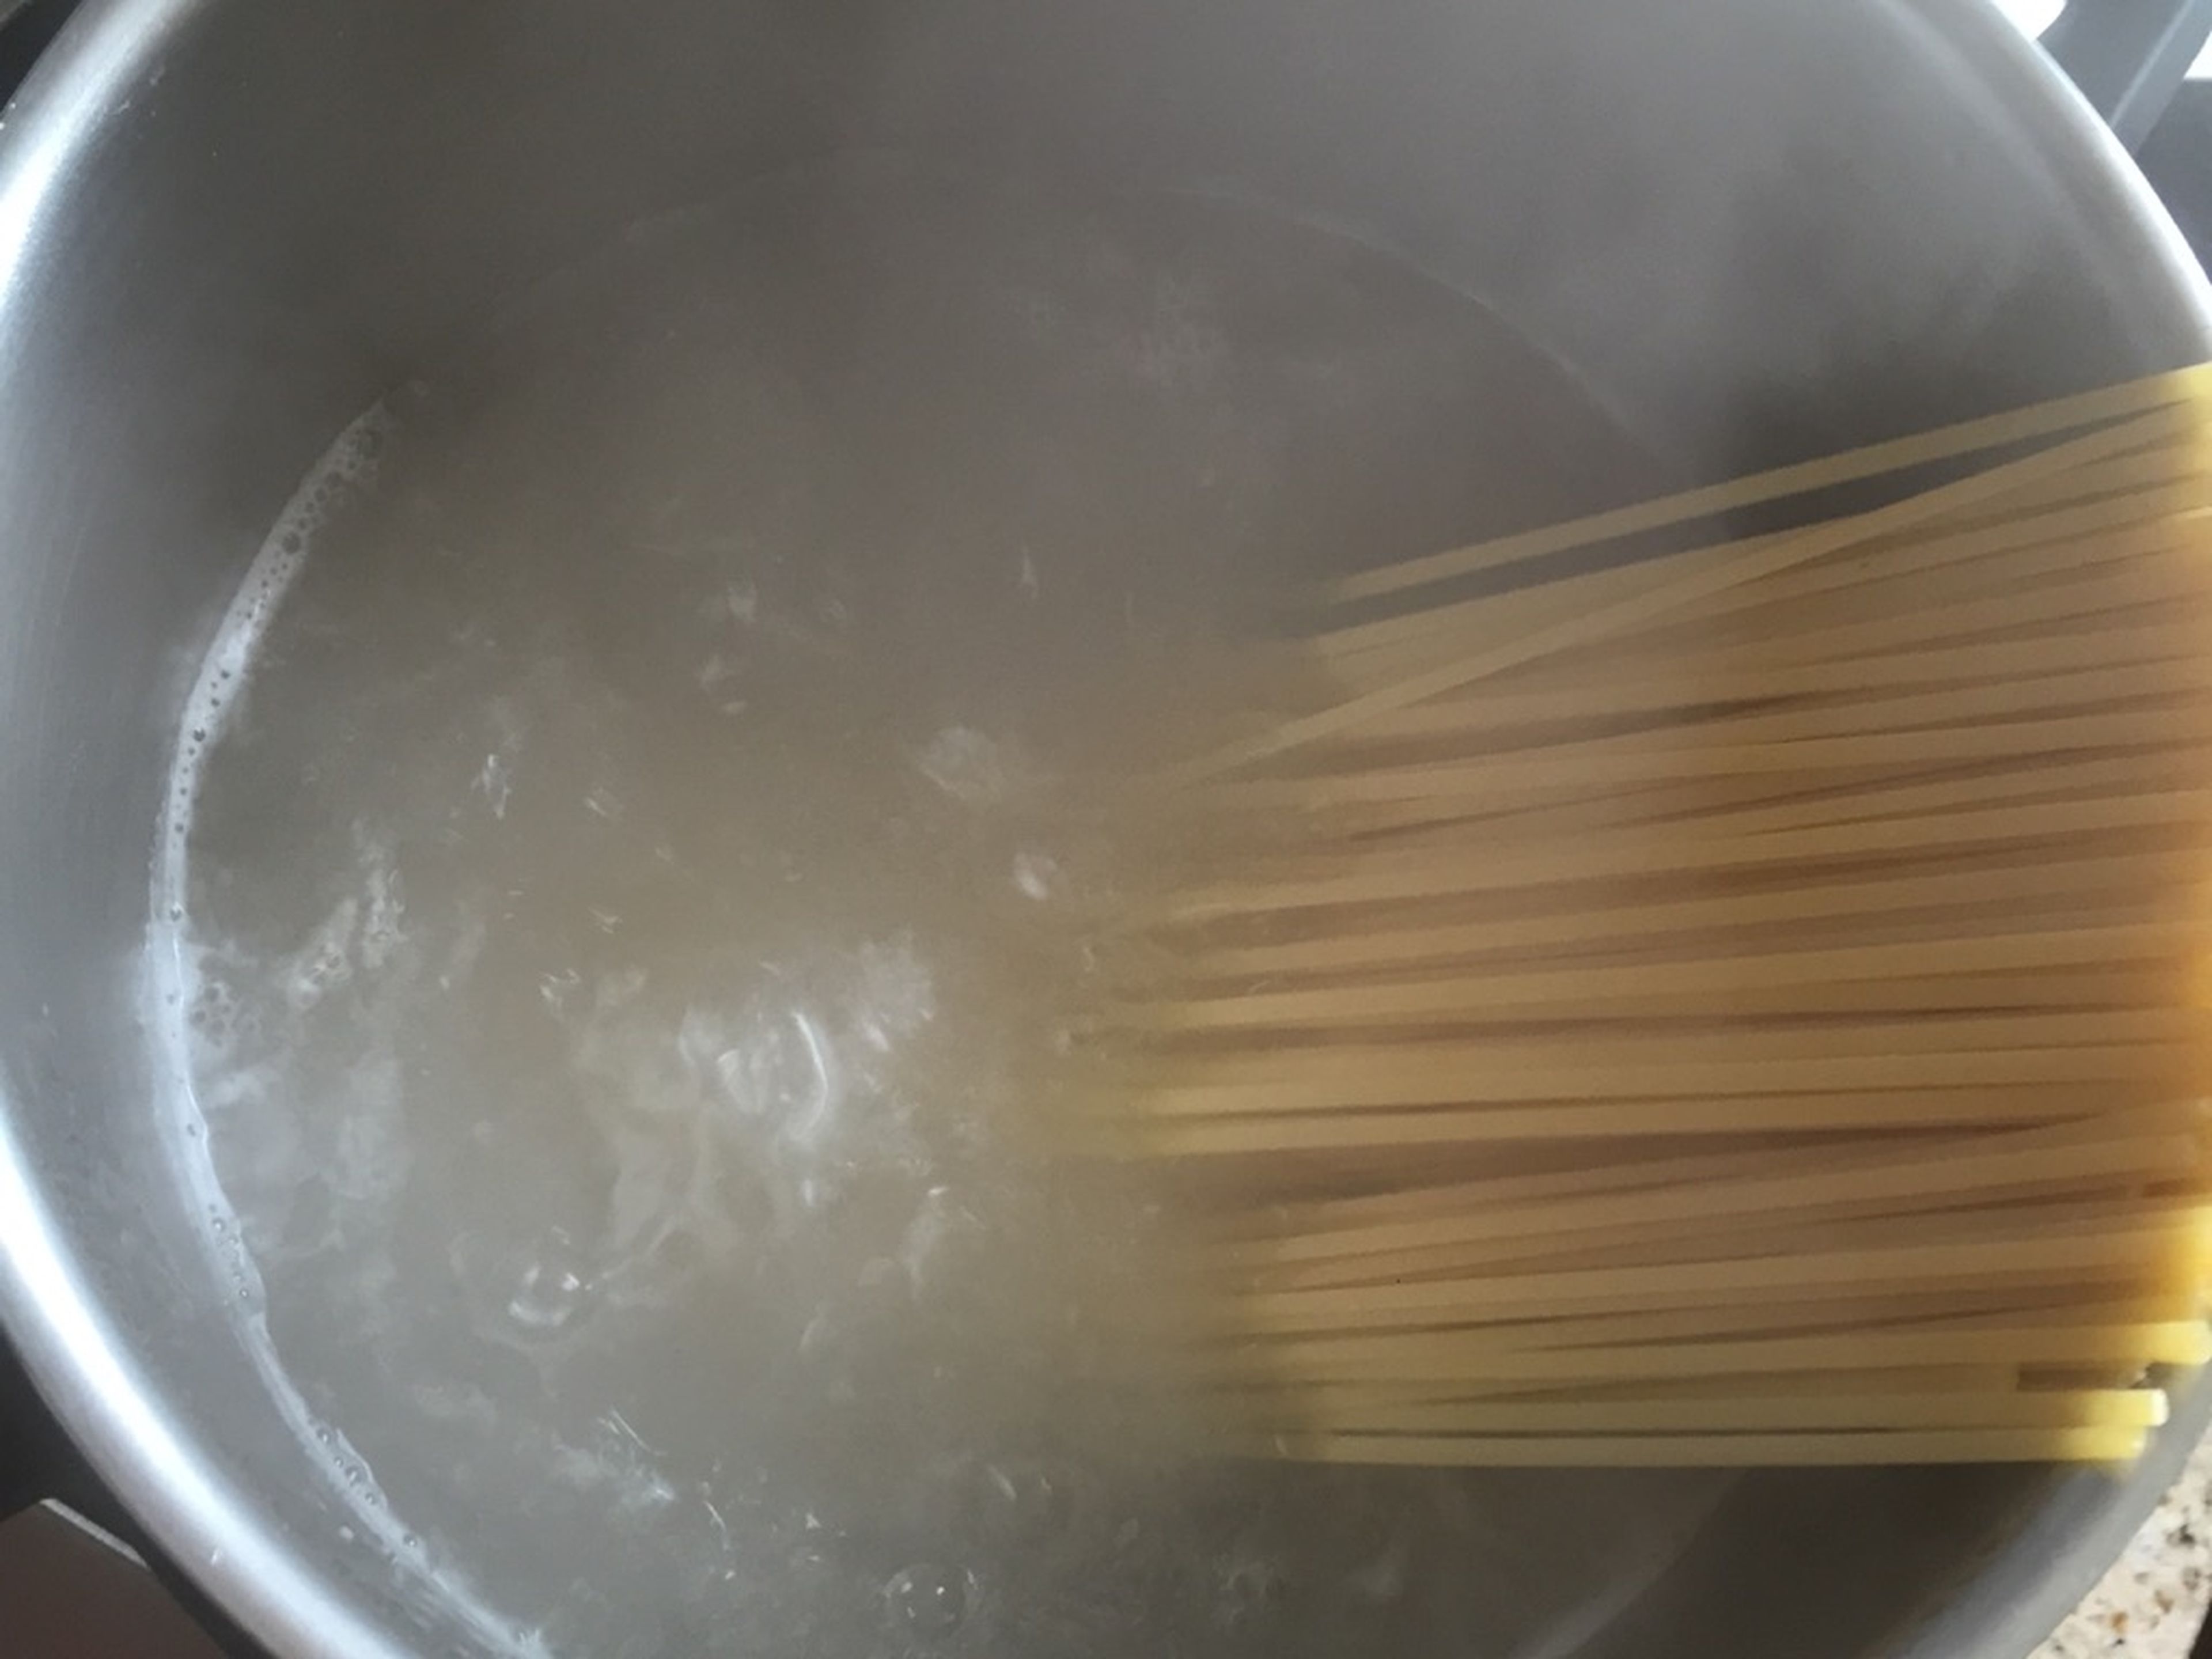 Cook linguine according to package instruction and drain.